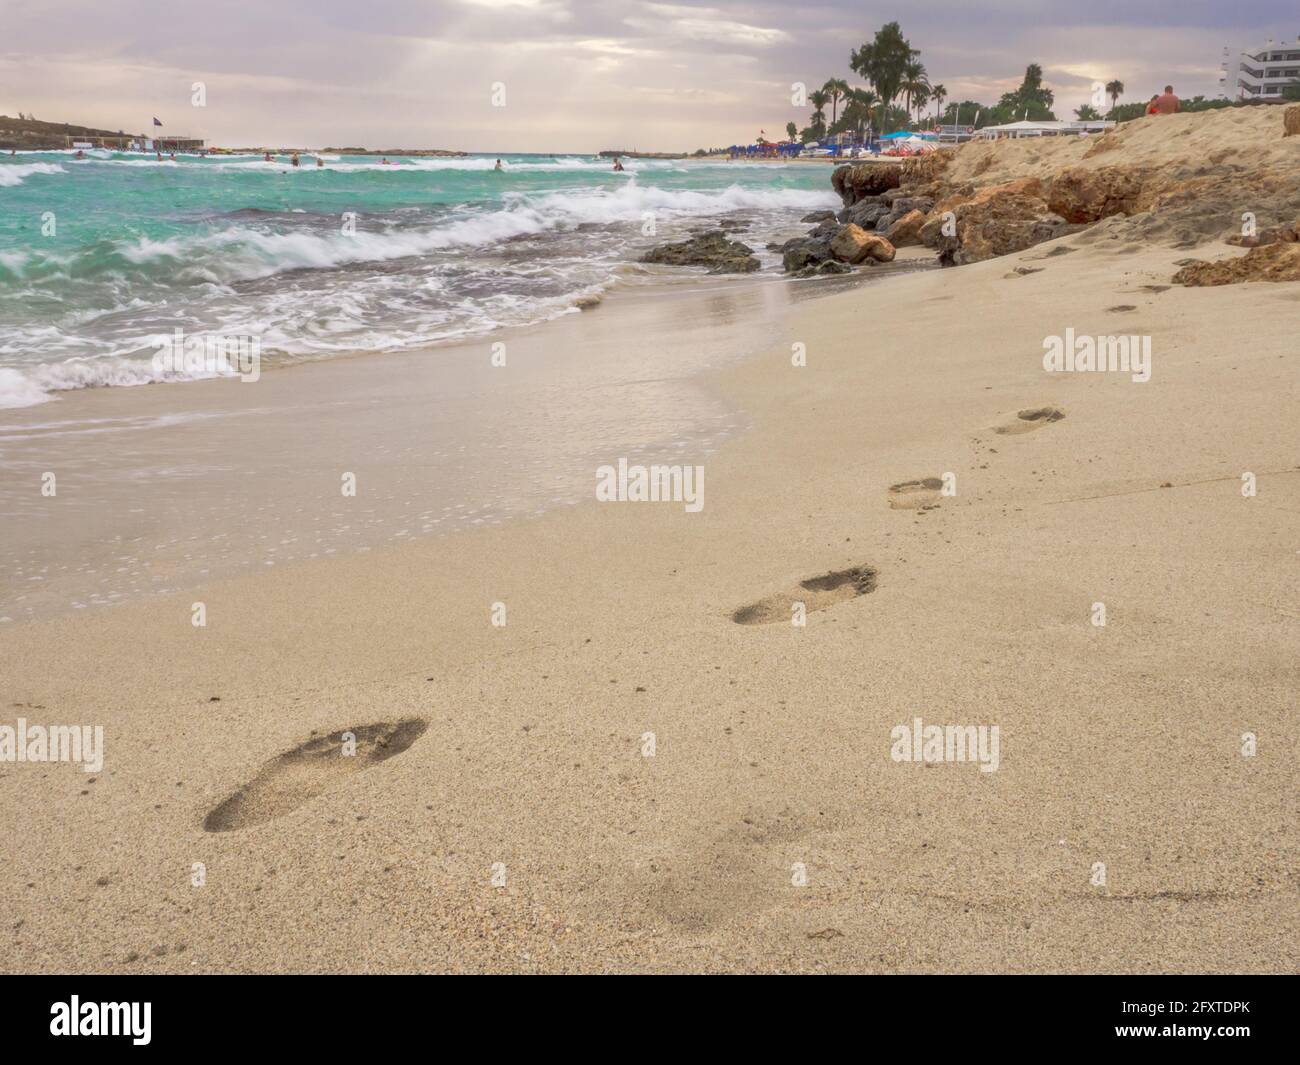 Empty picturesque Nissi beach with troubled cyan water, small rocky island, and dark cloudy sky in Ayia Napa, Cyprus. Delightful sea holidays. Stock Photo